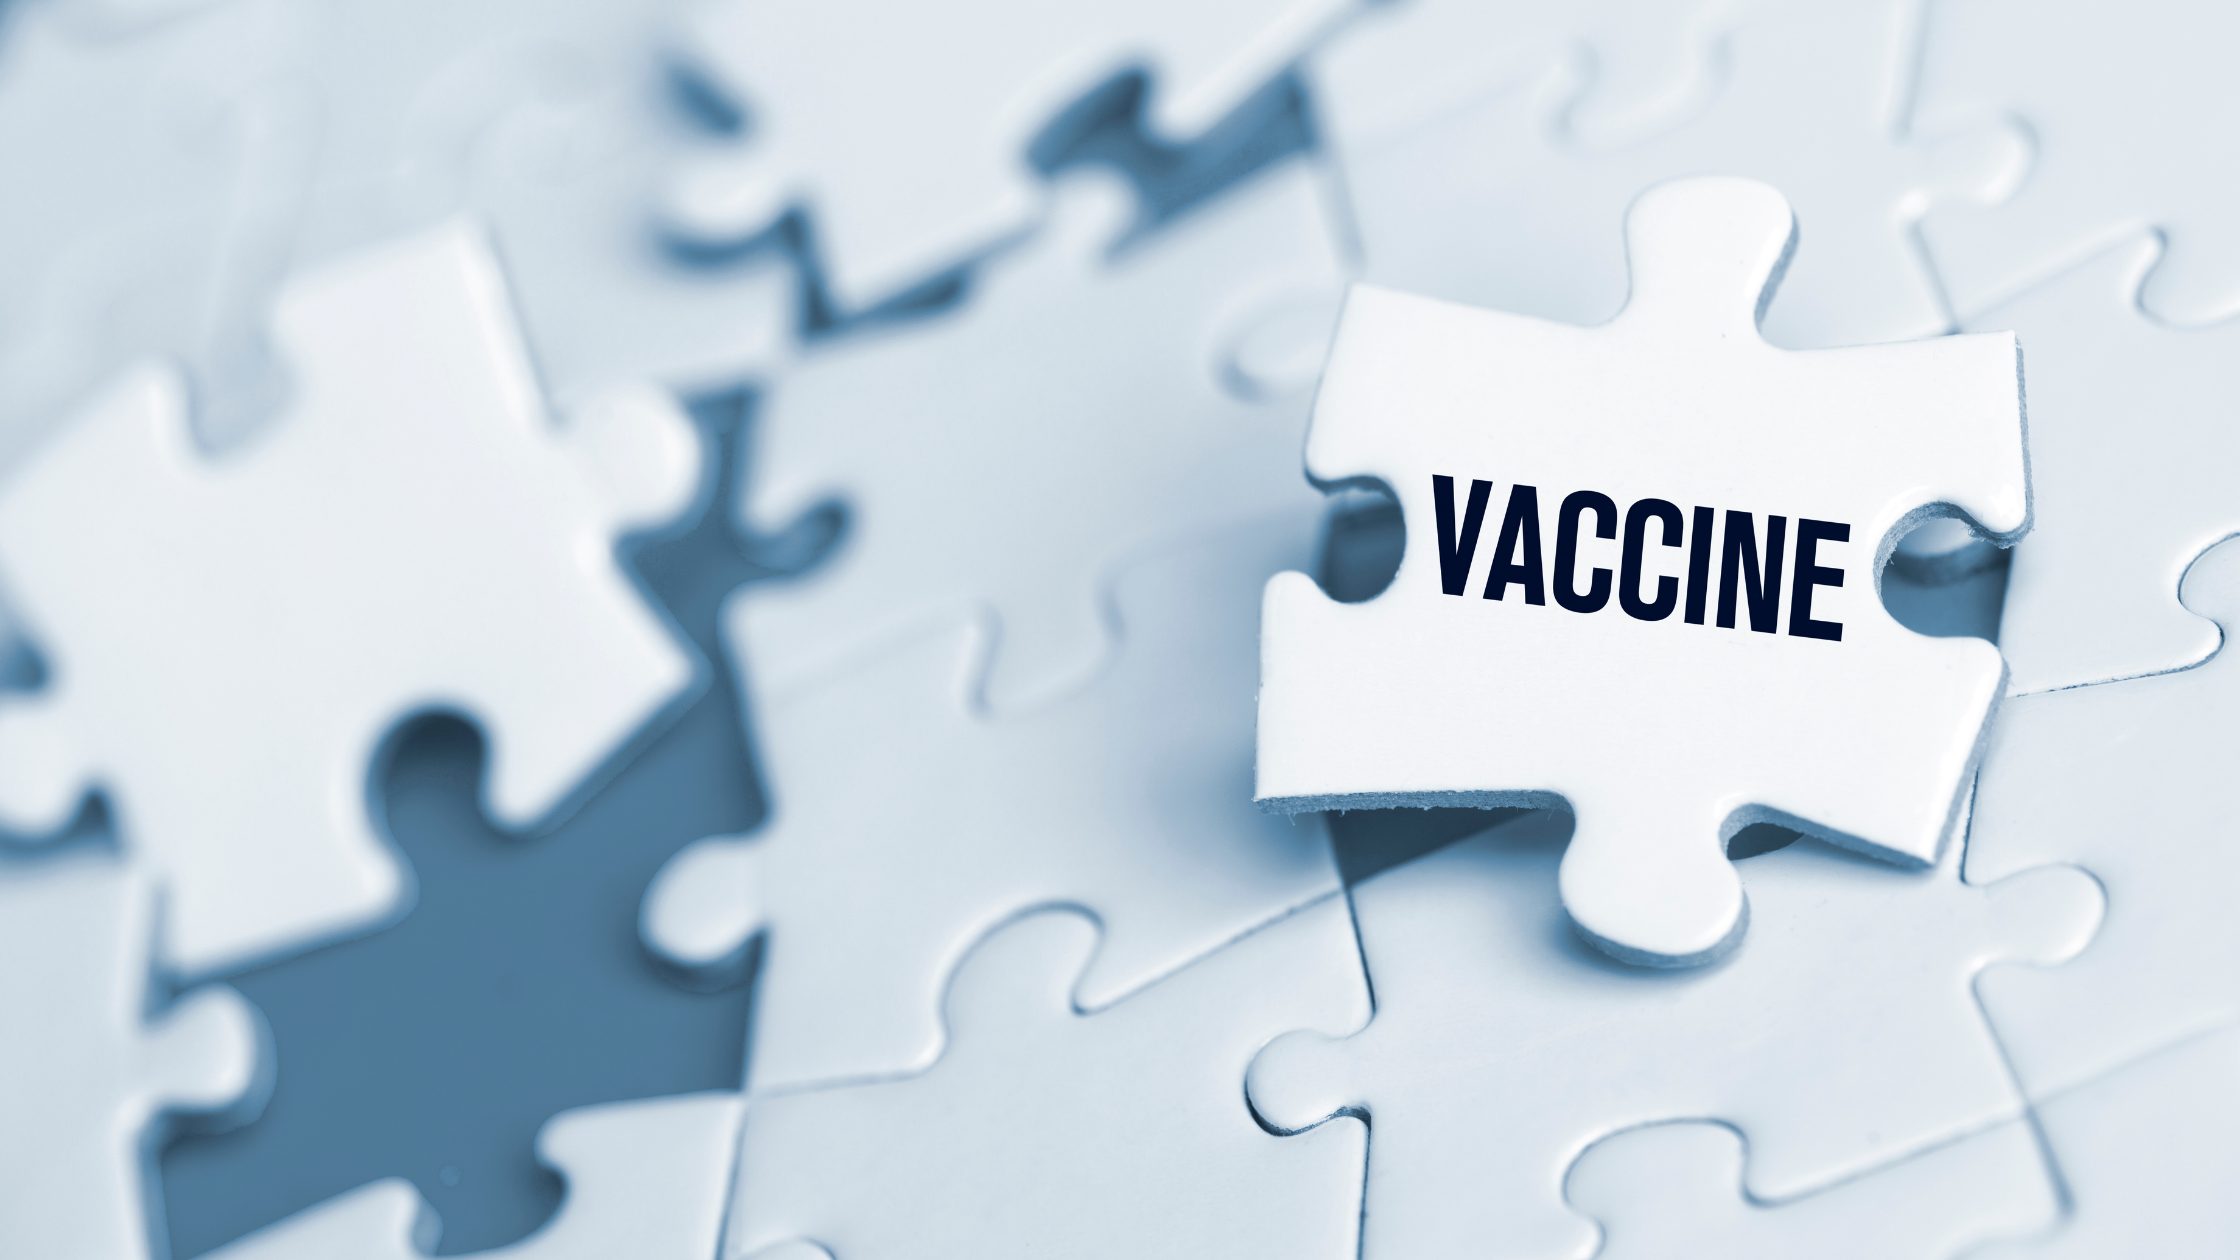 Will There Be A Big Shift in People When the Coronavirus Vaccine is Fully Rolled Out?